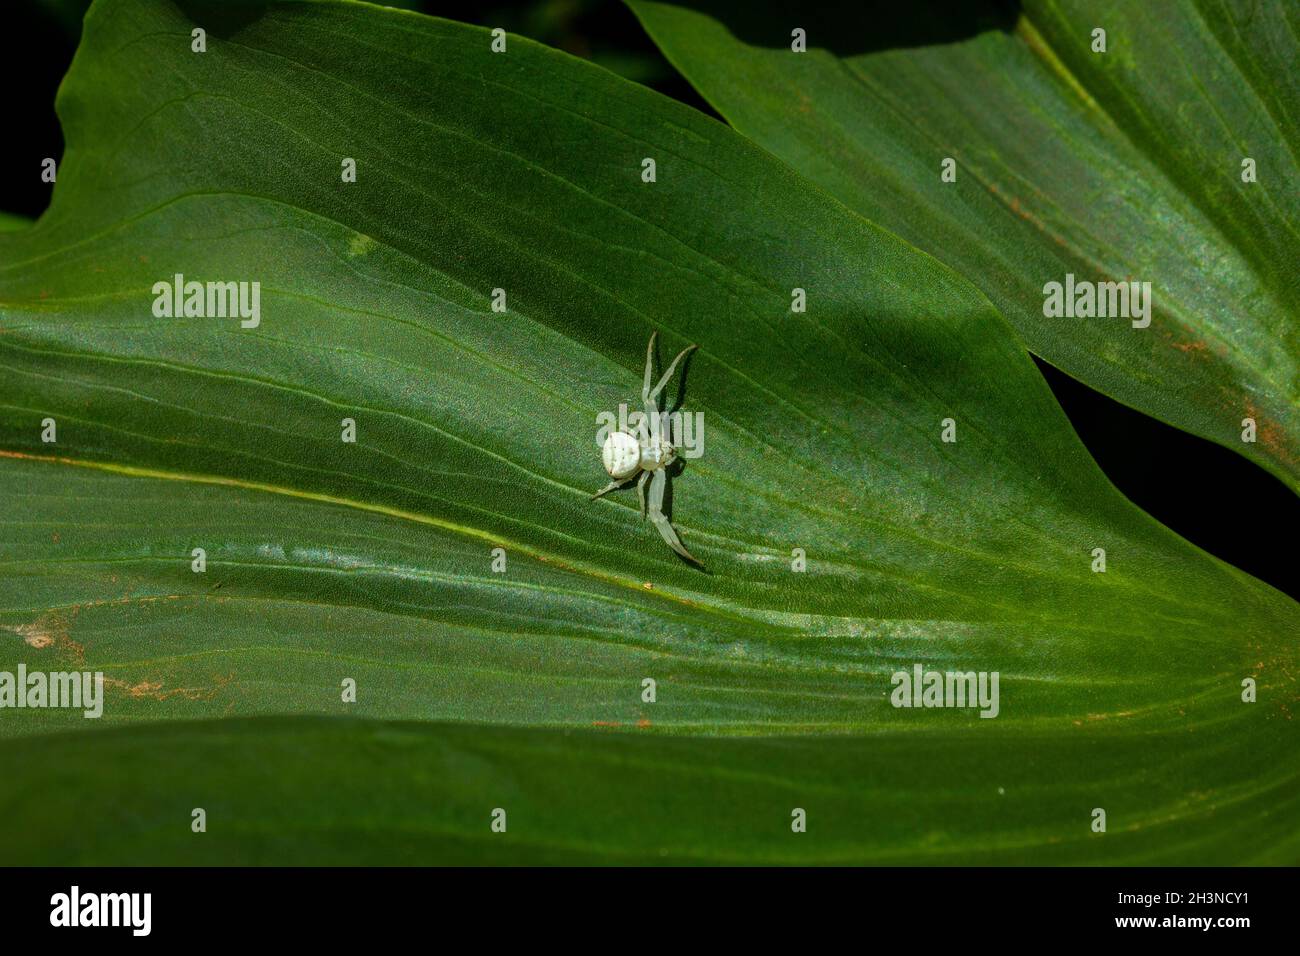 Small white spider on a broad green textured leaf waiting for prey. Stock Photo